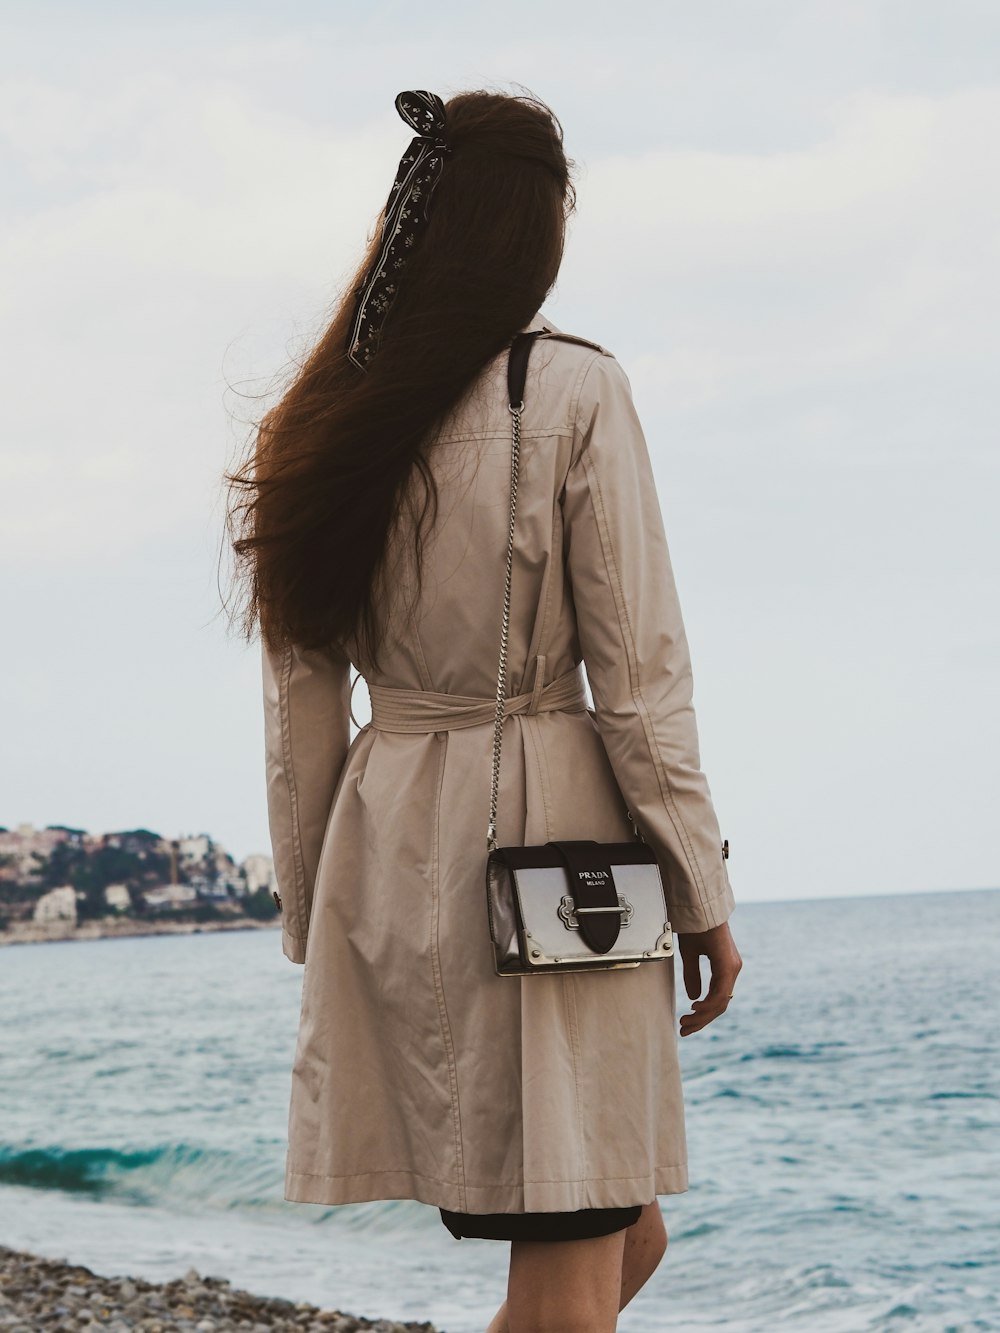 woman in brown coat standing near sea during daytime